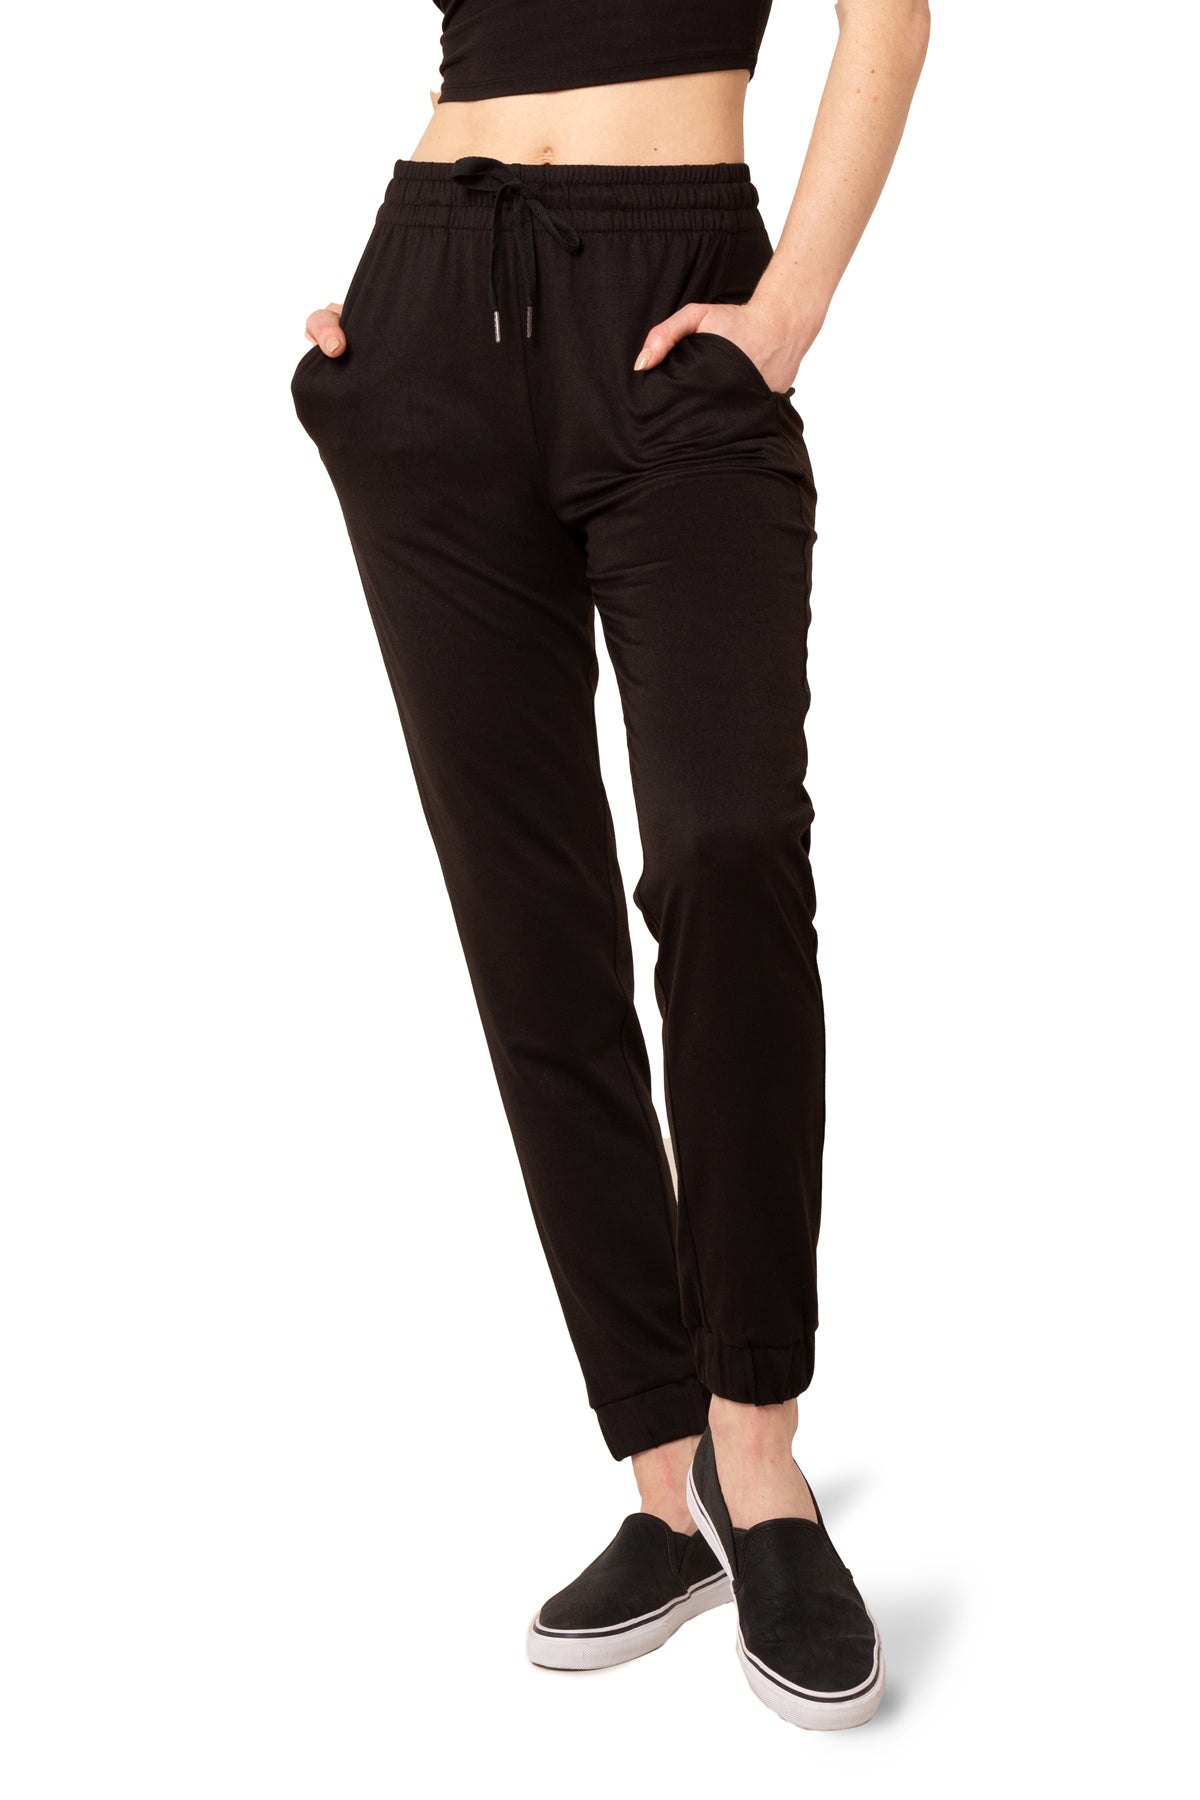  Kyodan Women's Slim Fit Trouser Pant Black X-Small : Clothing,  Shoes & Jewelry